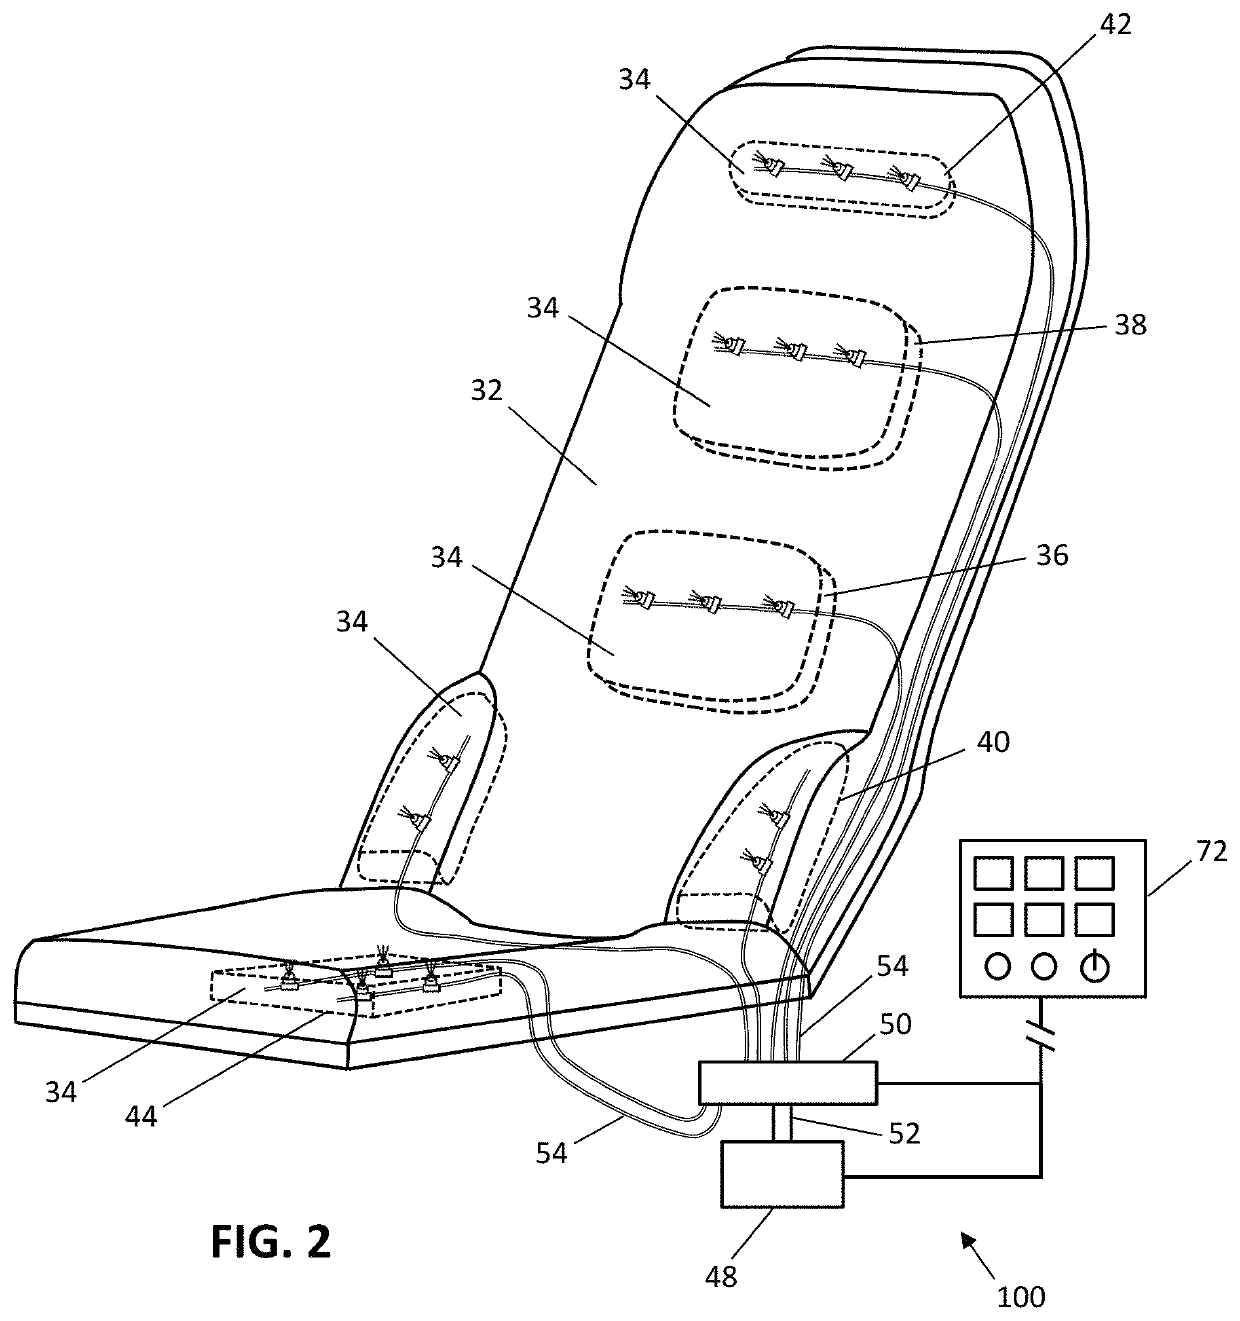 Seat assembly with ventilation system utilizing venturi effect to multiply air flow